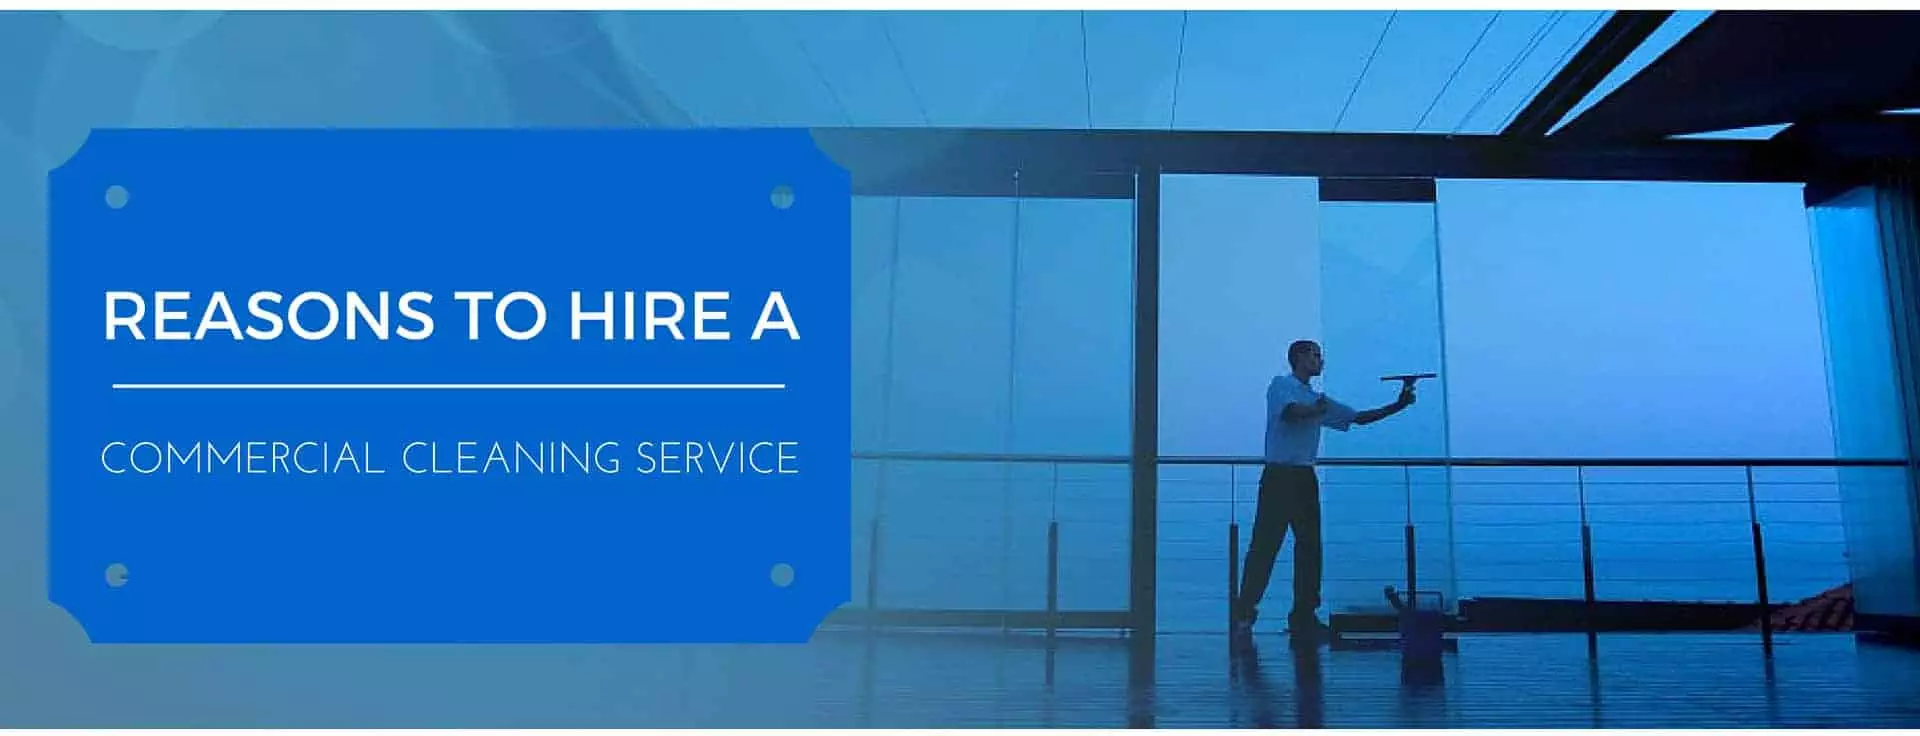 Hire a commercial cleaning service